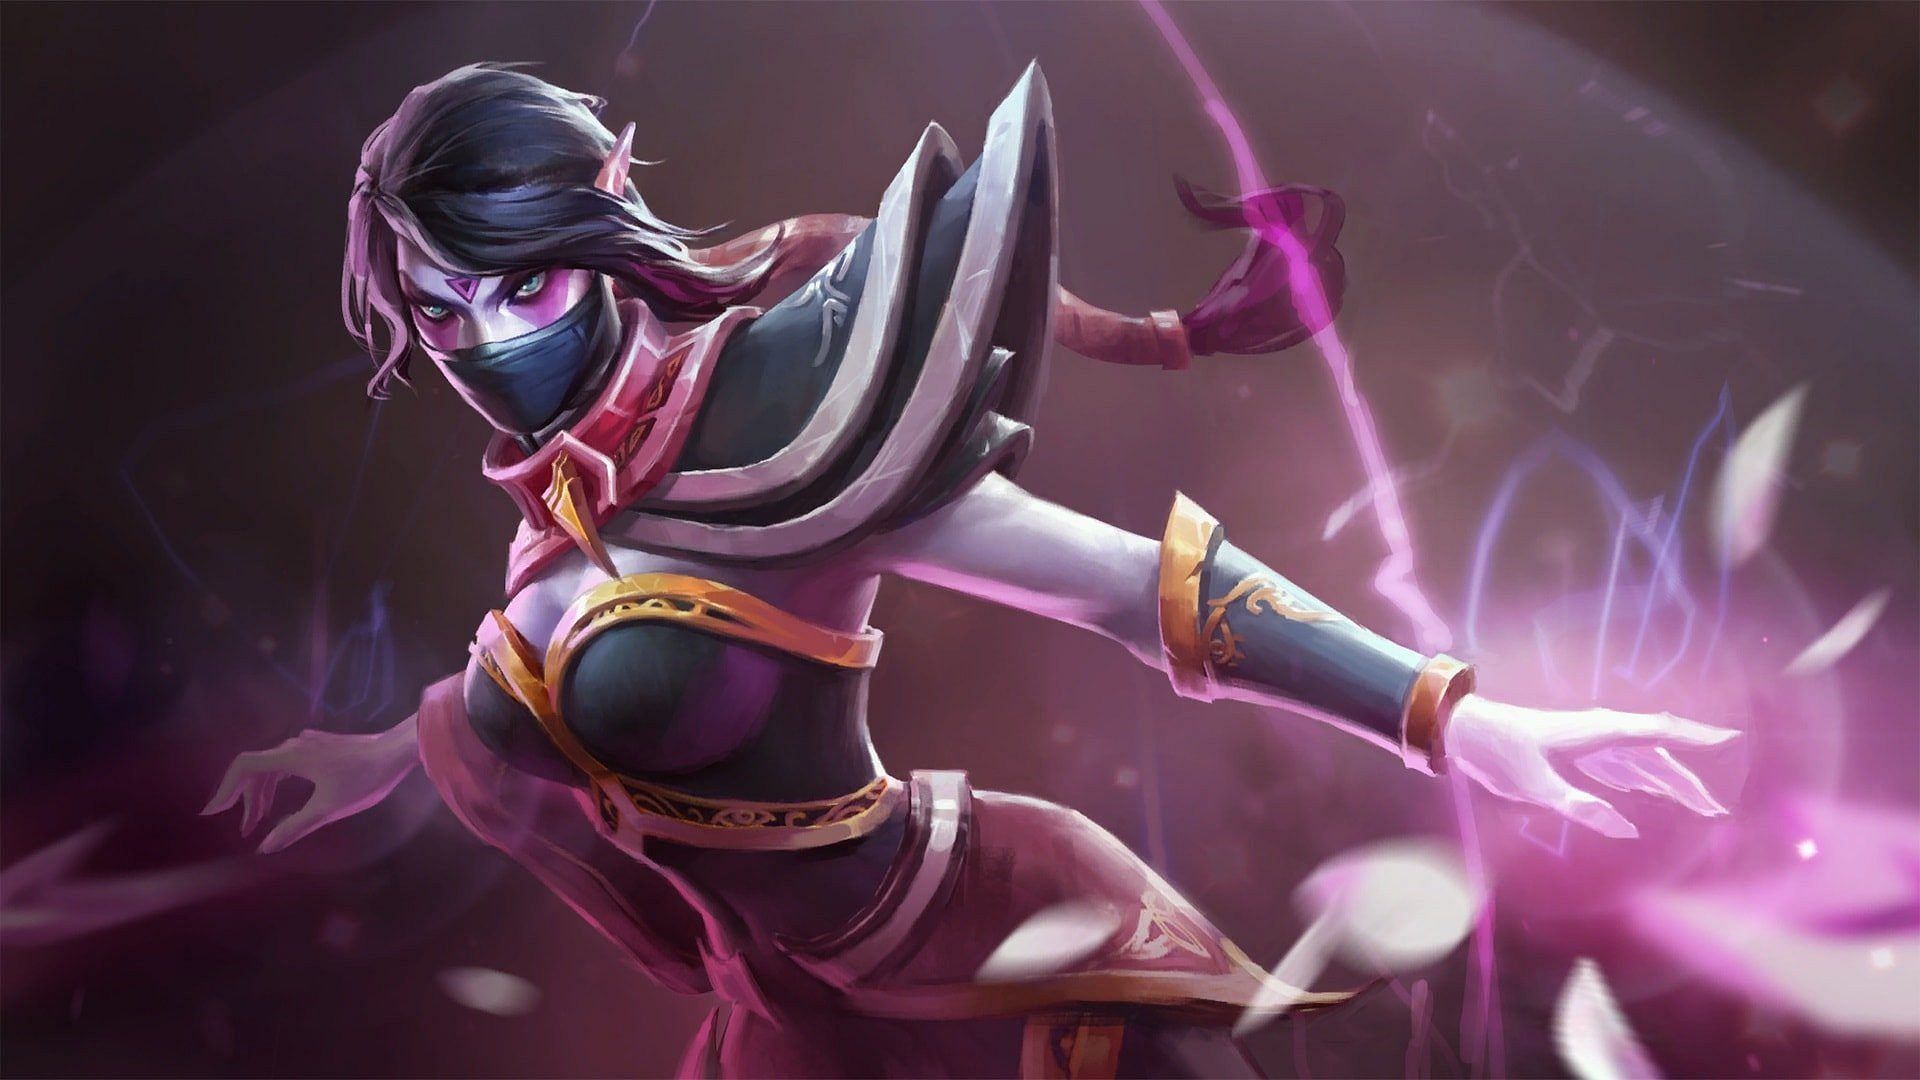 Templar Assassin wields her deadly blades, poised to strike with unmatched precision (Image via DOTA 2)